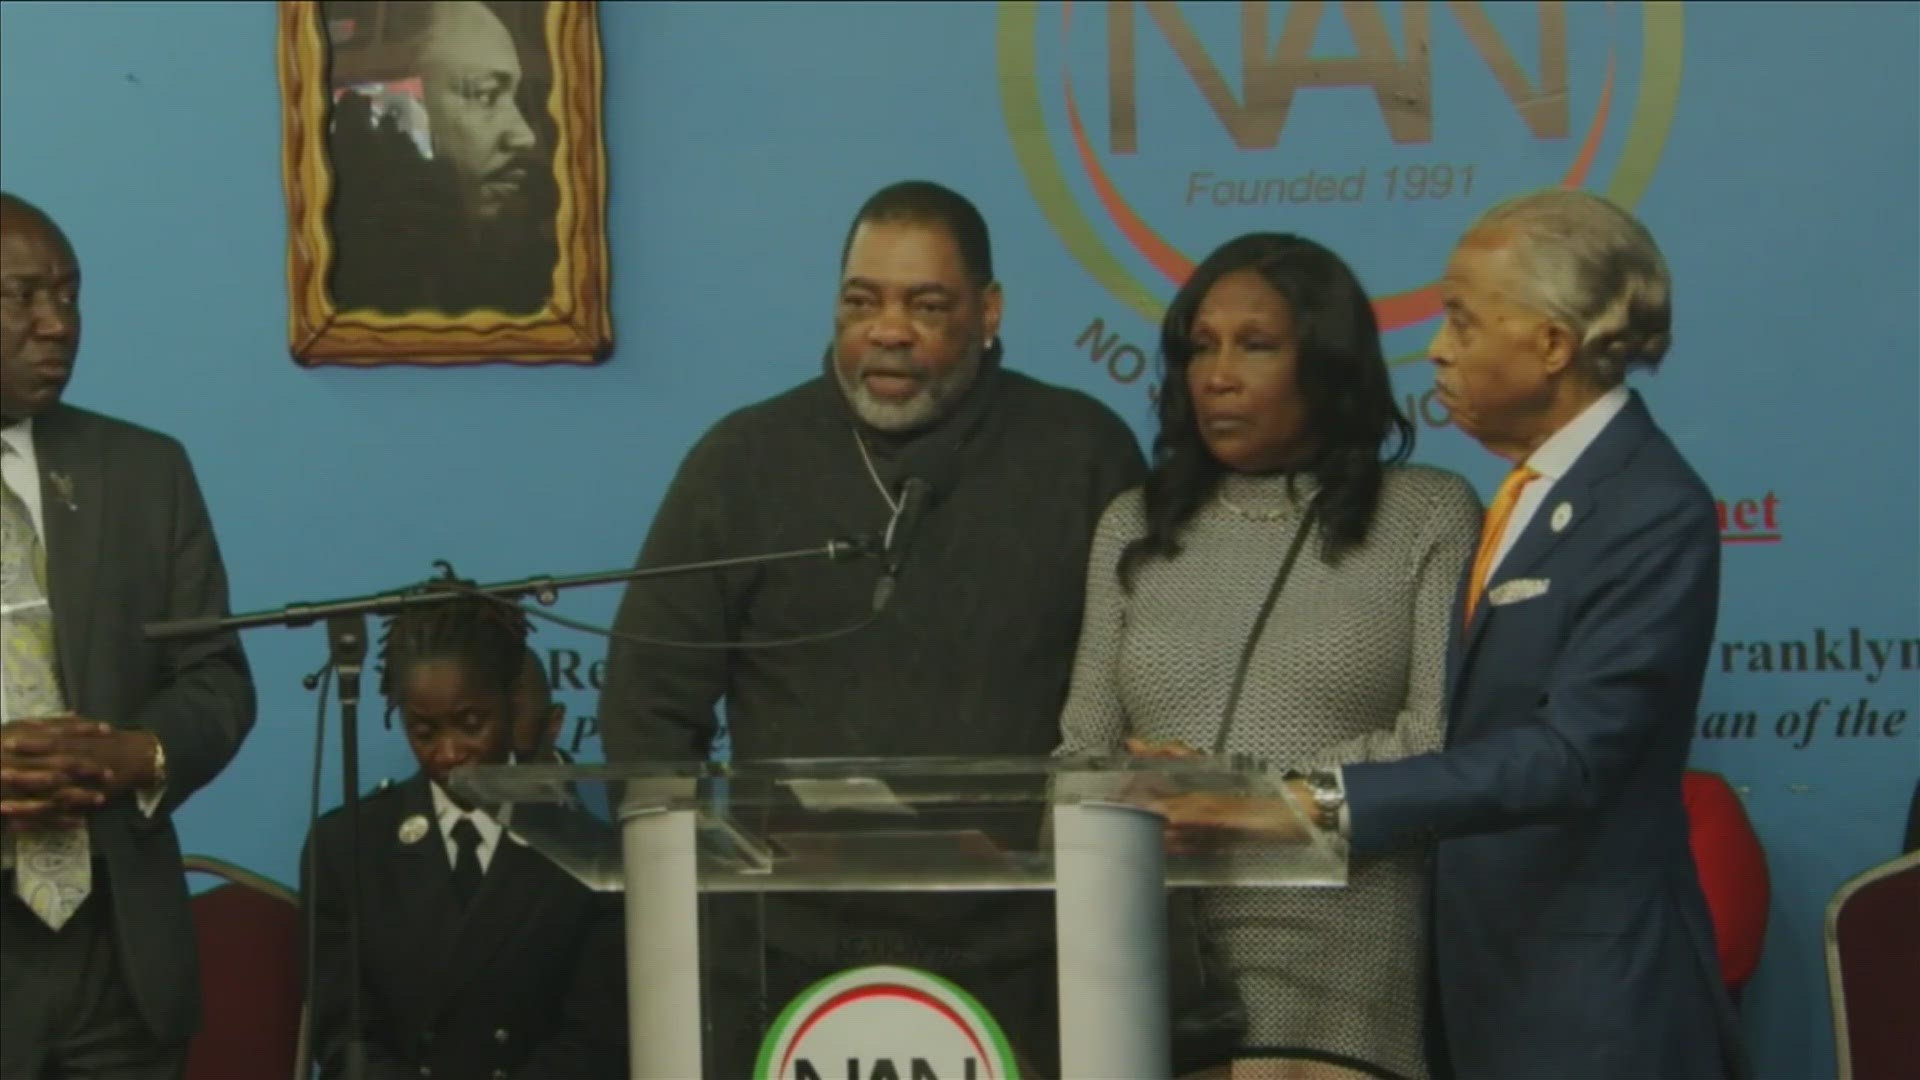 Rodney Wells said the family's life was turned upside down but that they will keep fighting for justice "for all sons."